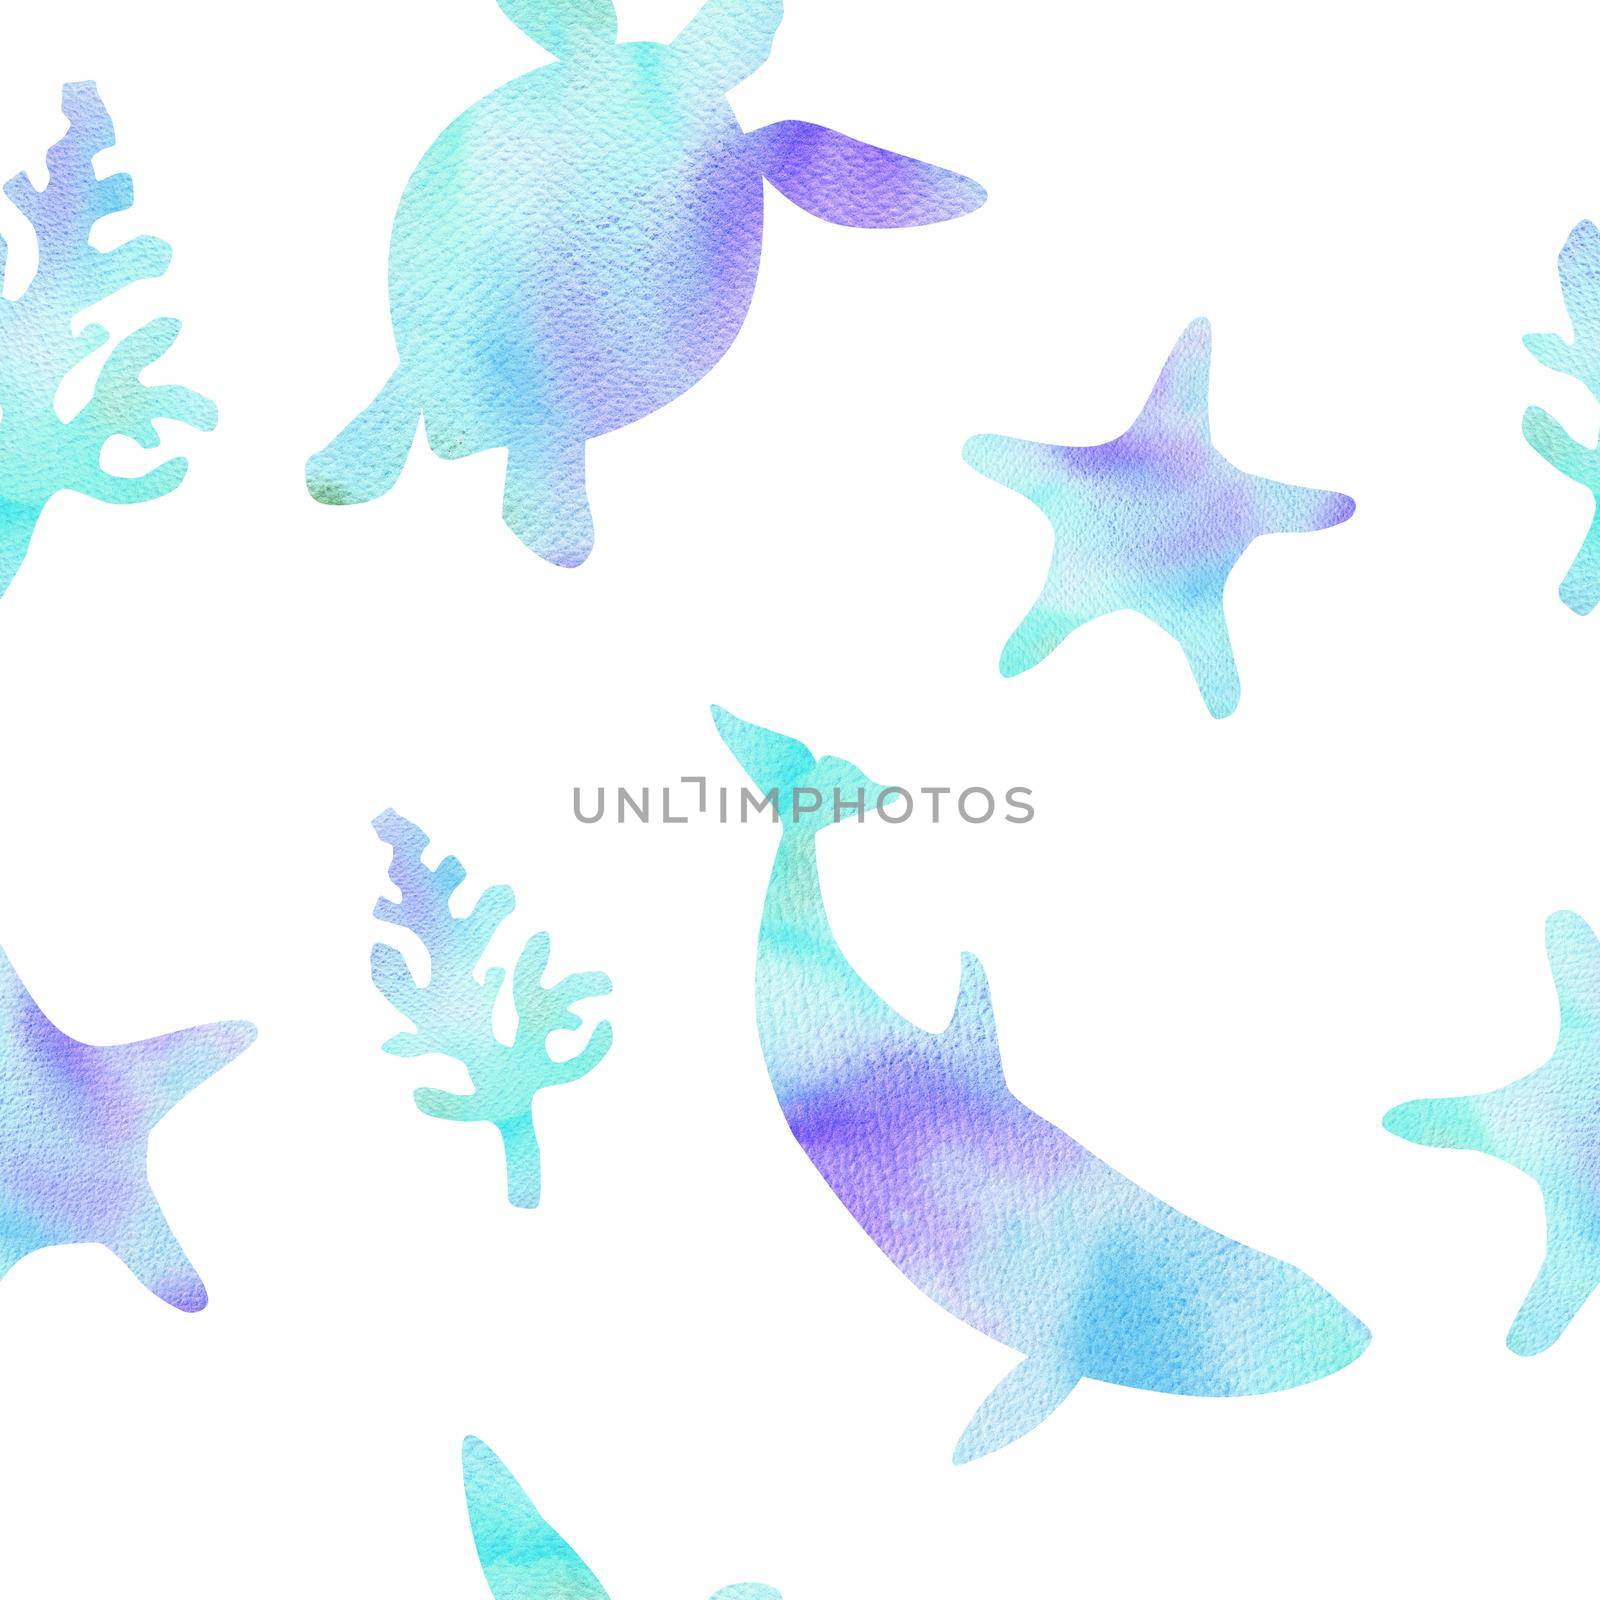 watercolor blue whale and turtle seamless pattern on white background for fabric,textile,wrapping,scrapbooking. Underwater life. Ocean animals by dreamloud